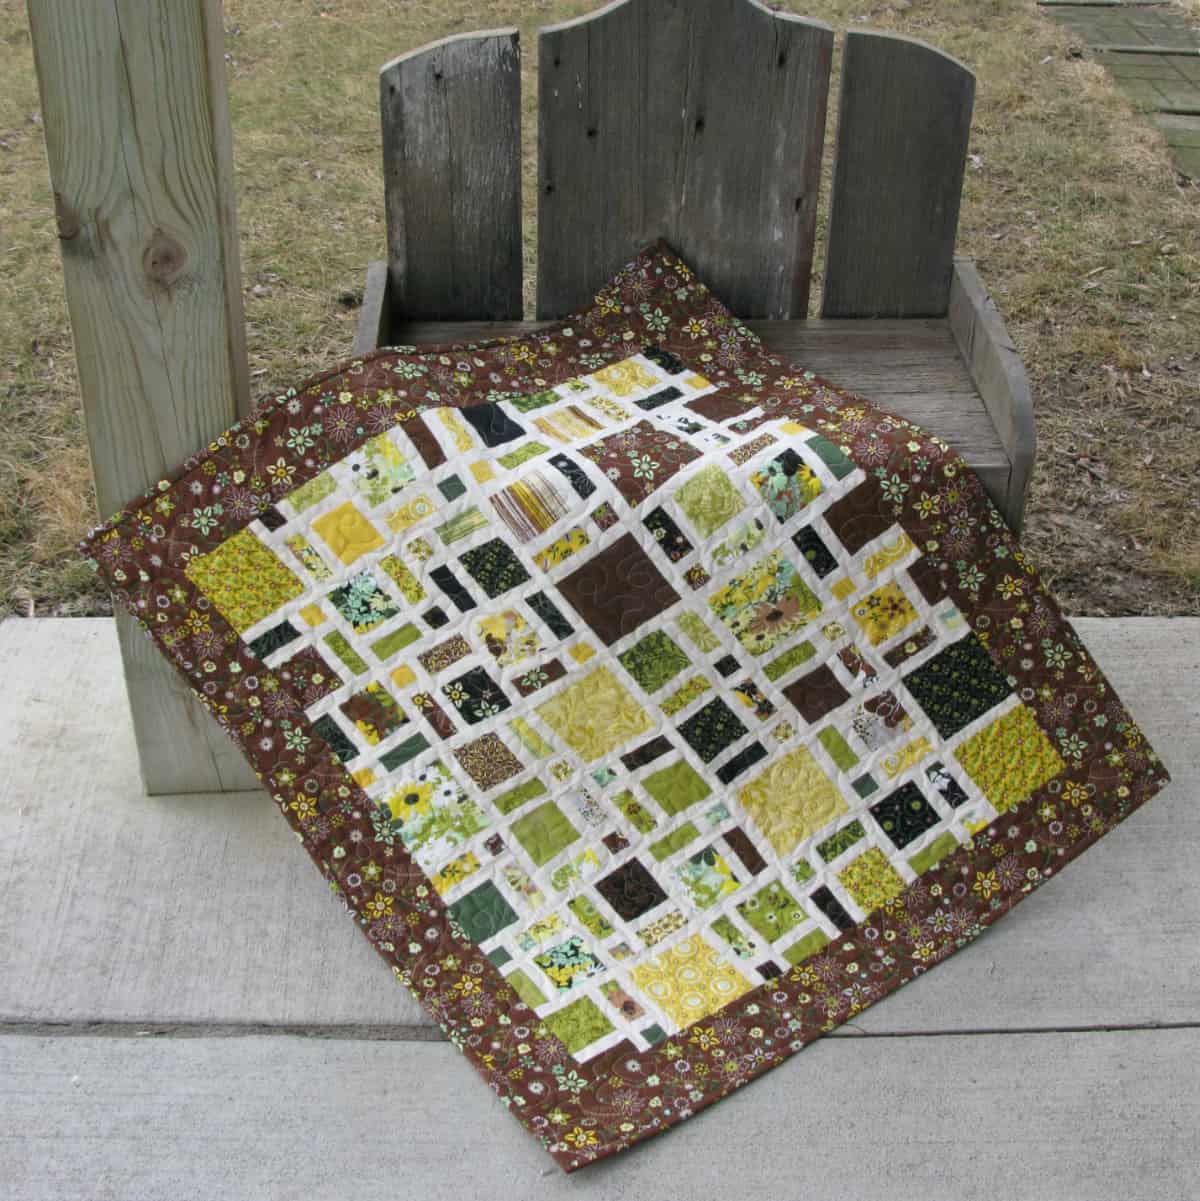 Mini Scattered quilt